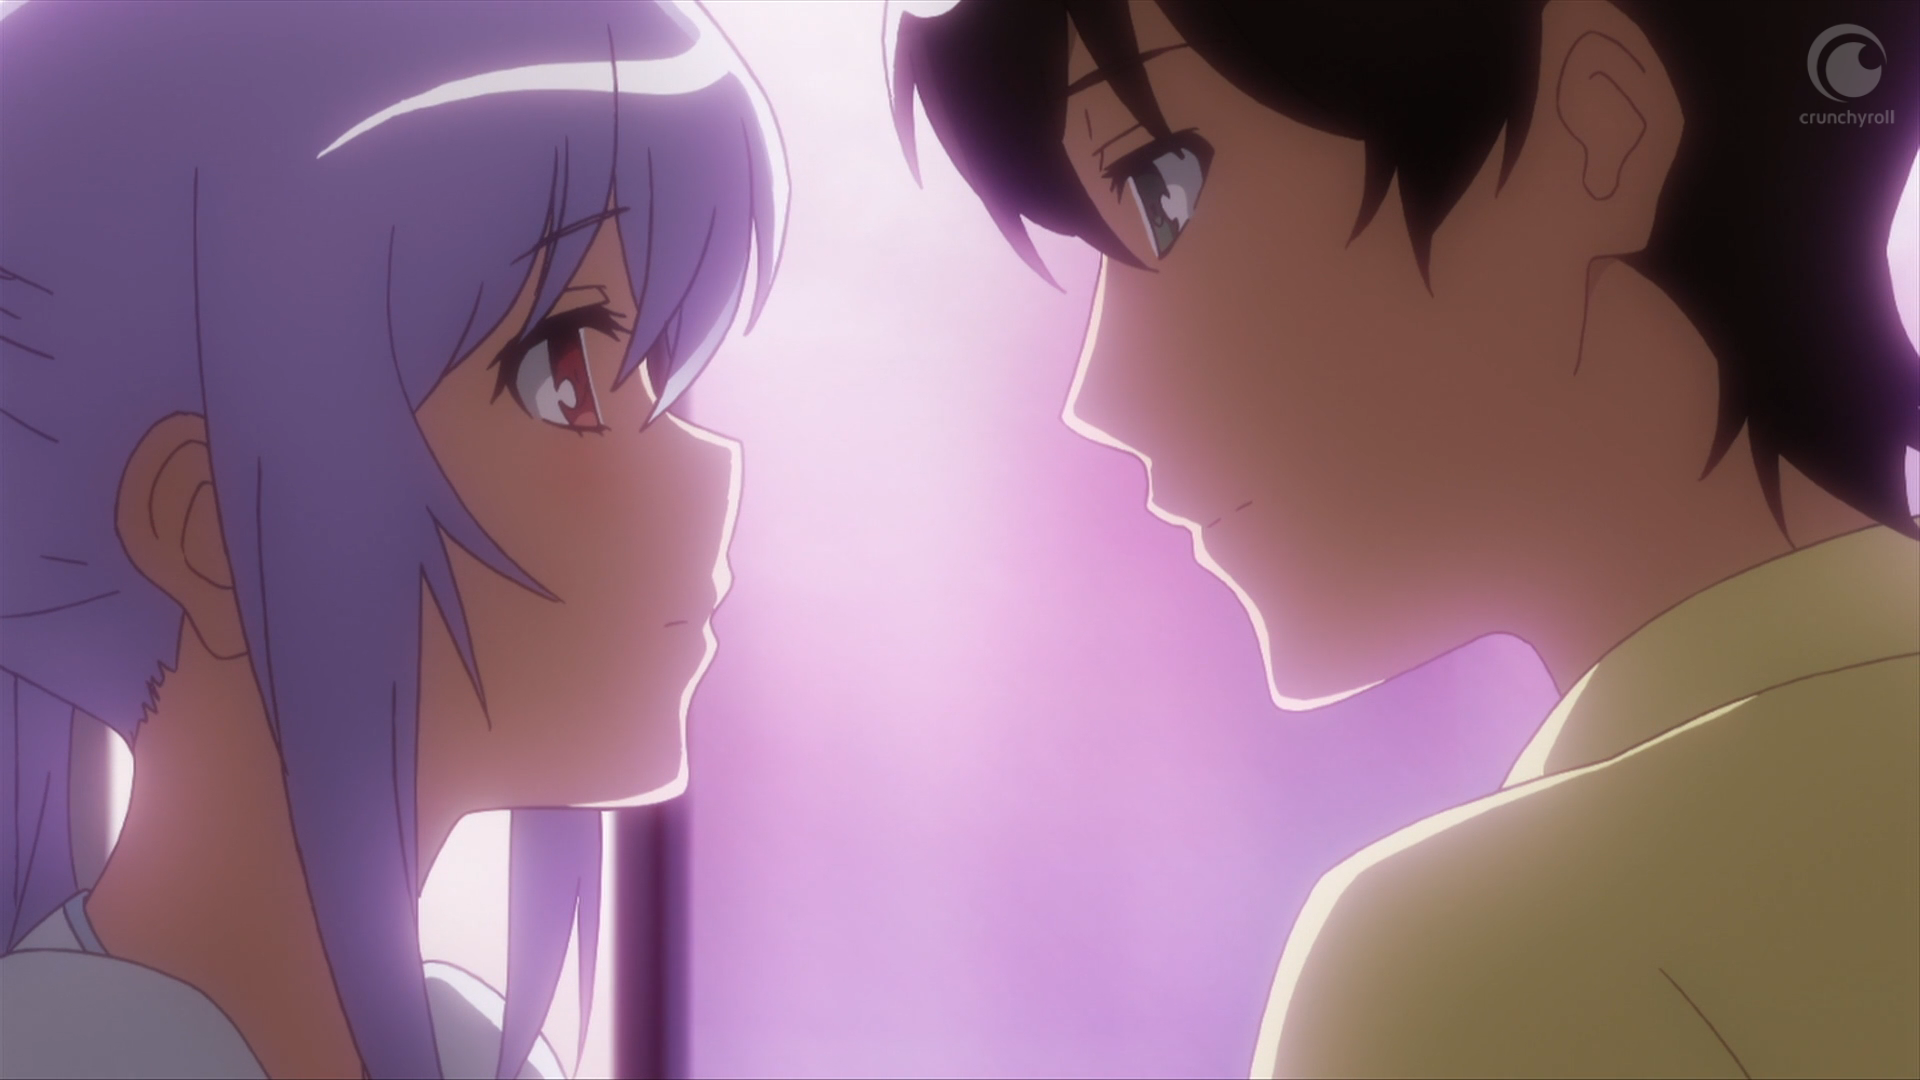 Plastic Memories Episode 13 Finale Review THE FEELS FROM THIS